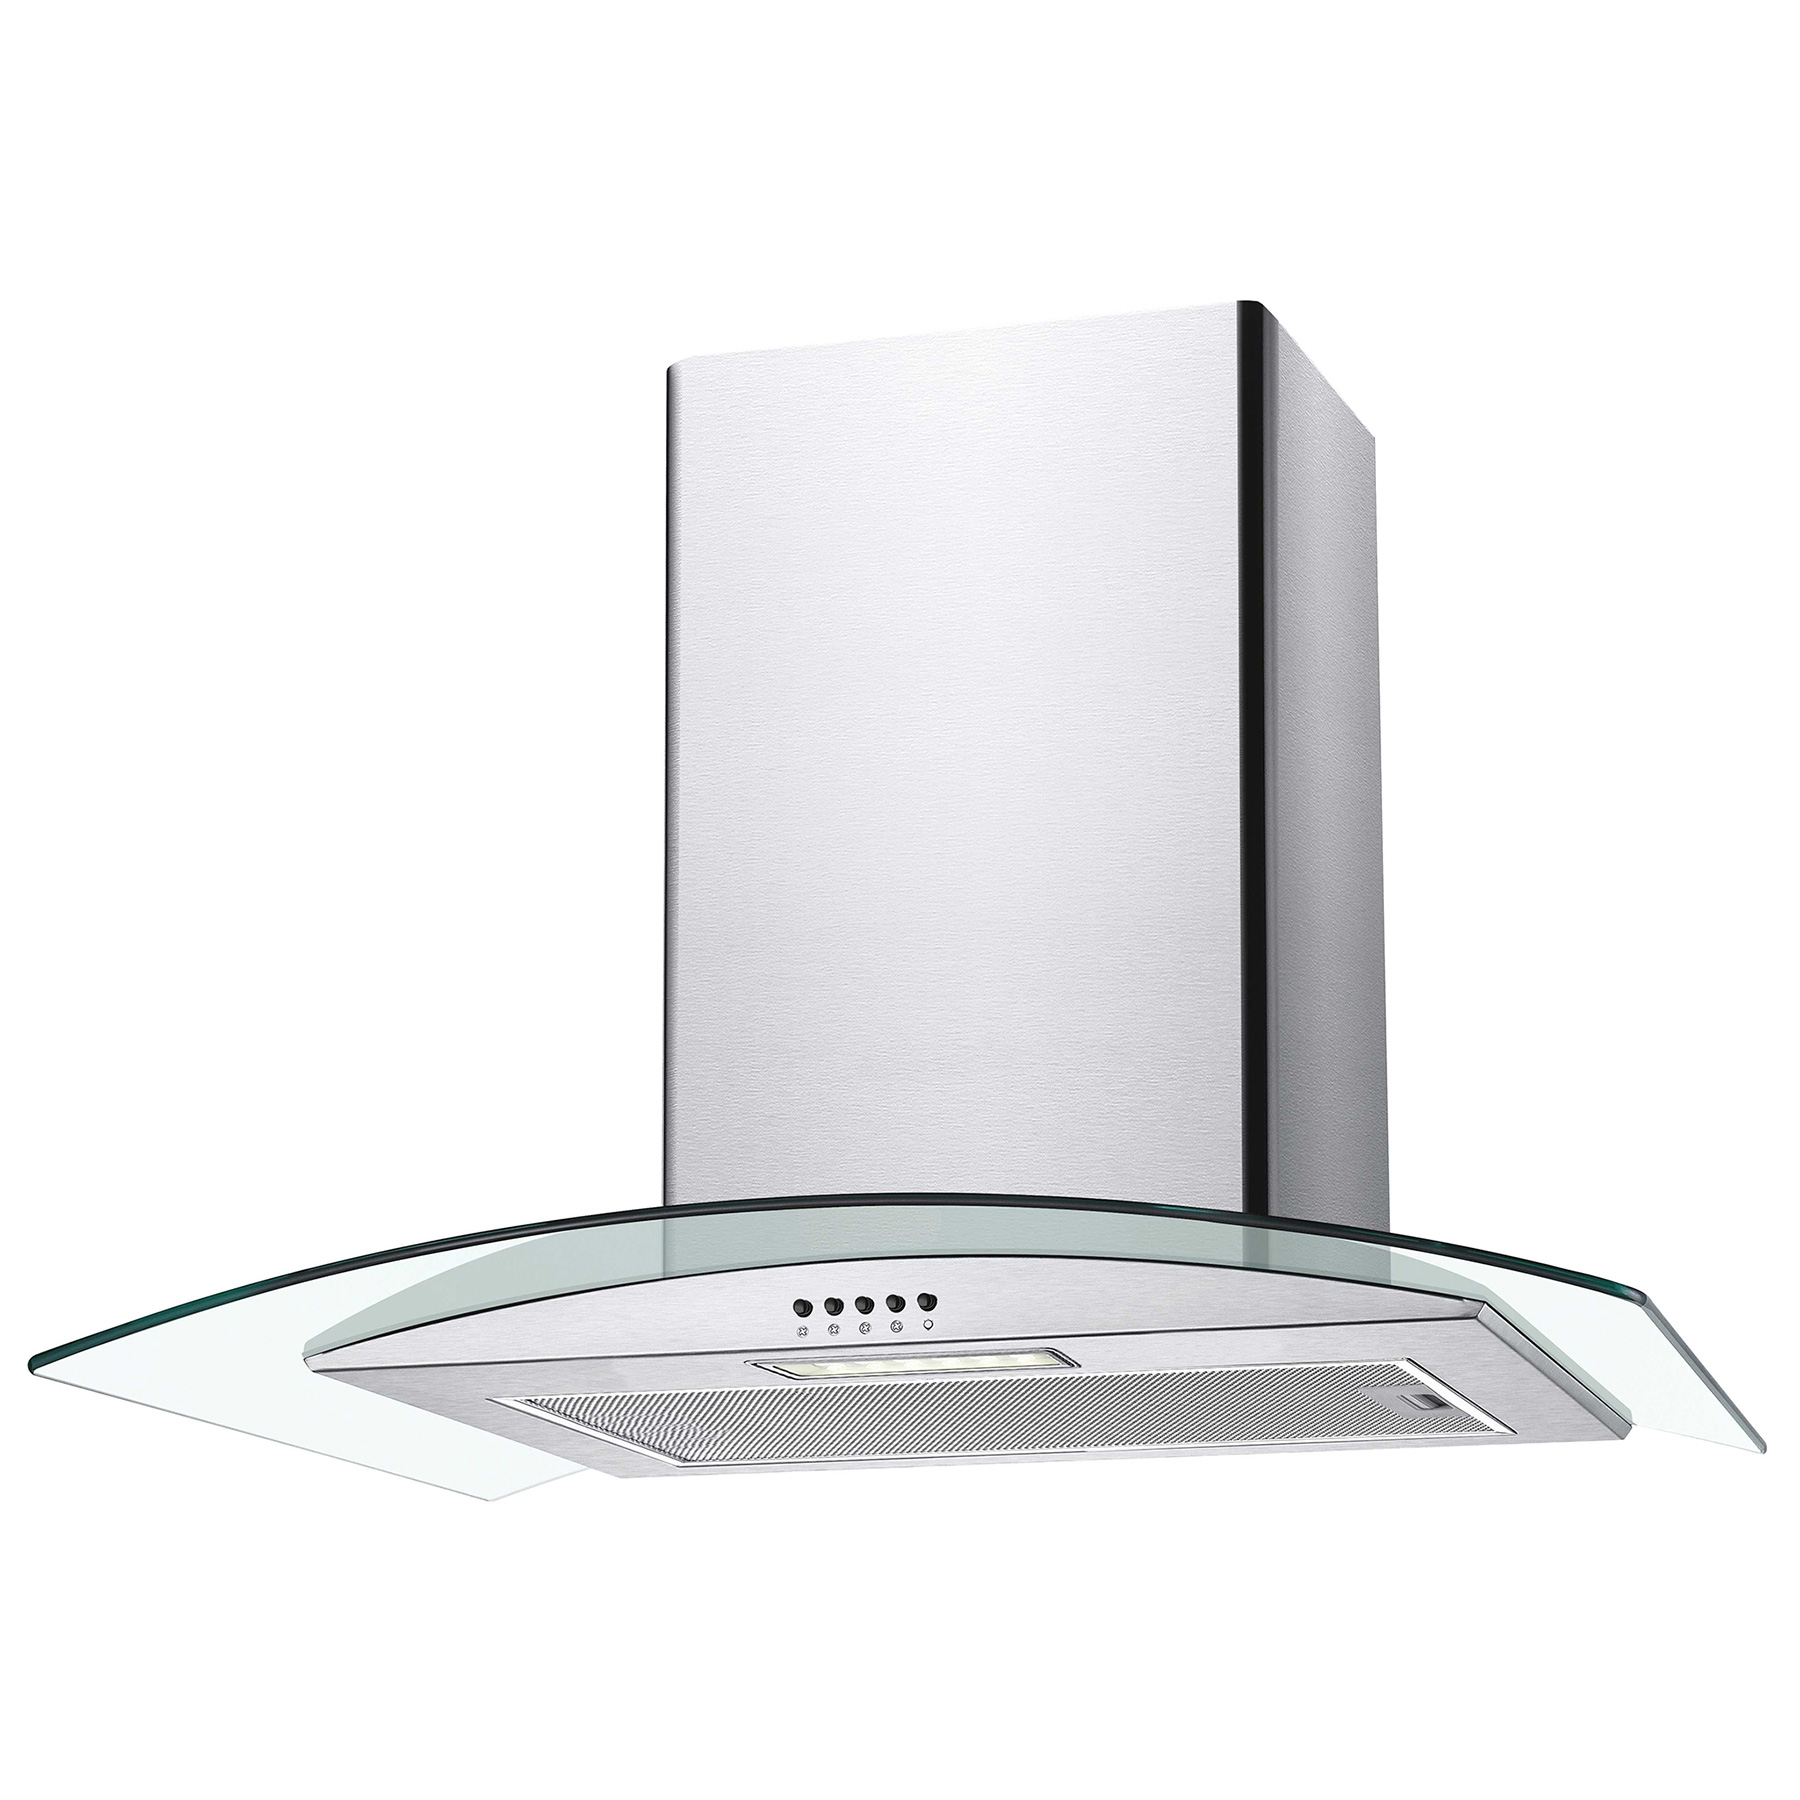 Image of Candy CGM70NX 70cm Curved Glass Chimney Hood in Stainless Steel